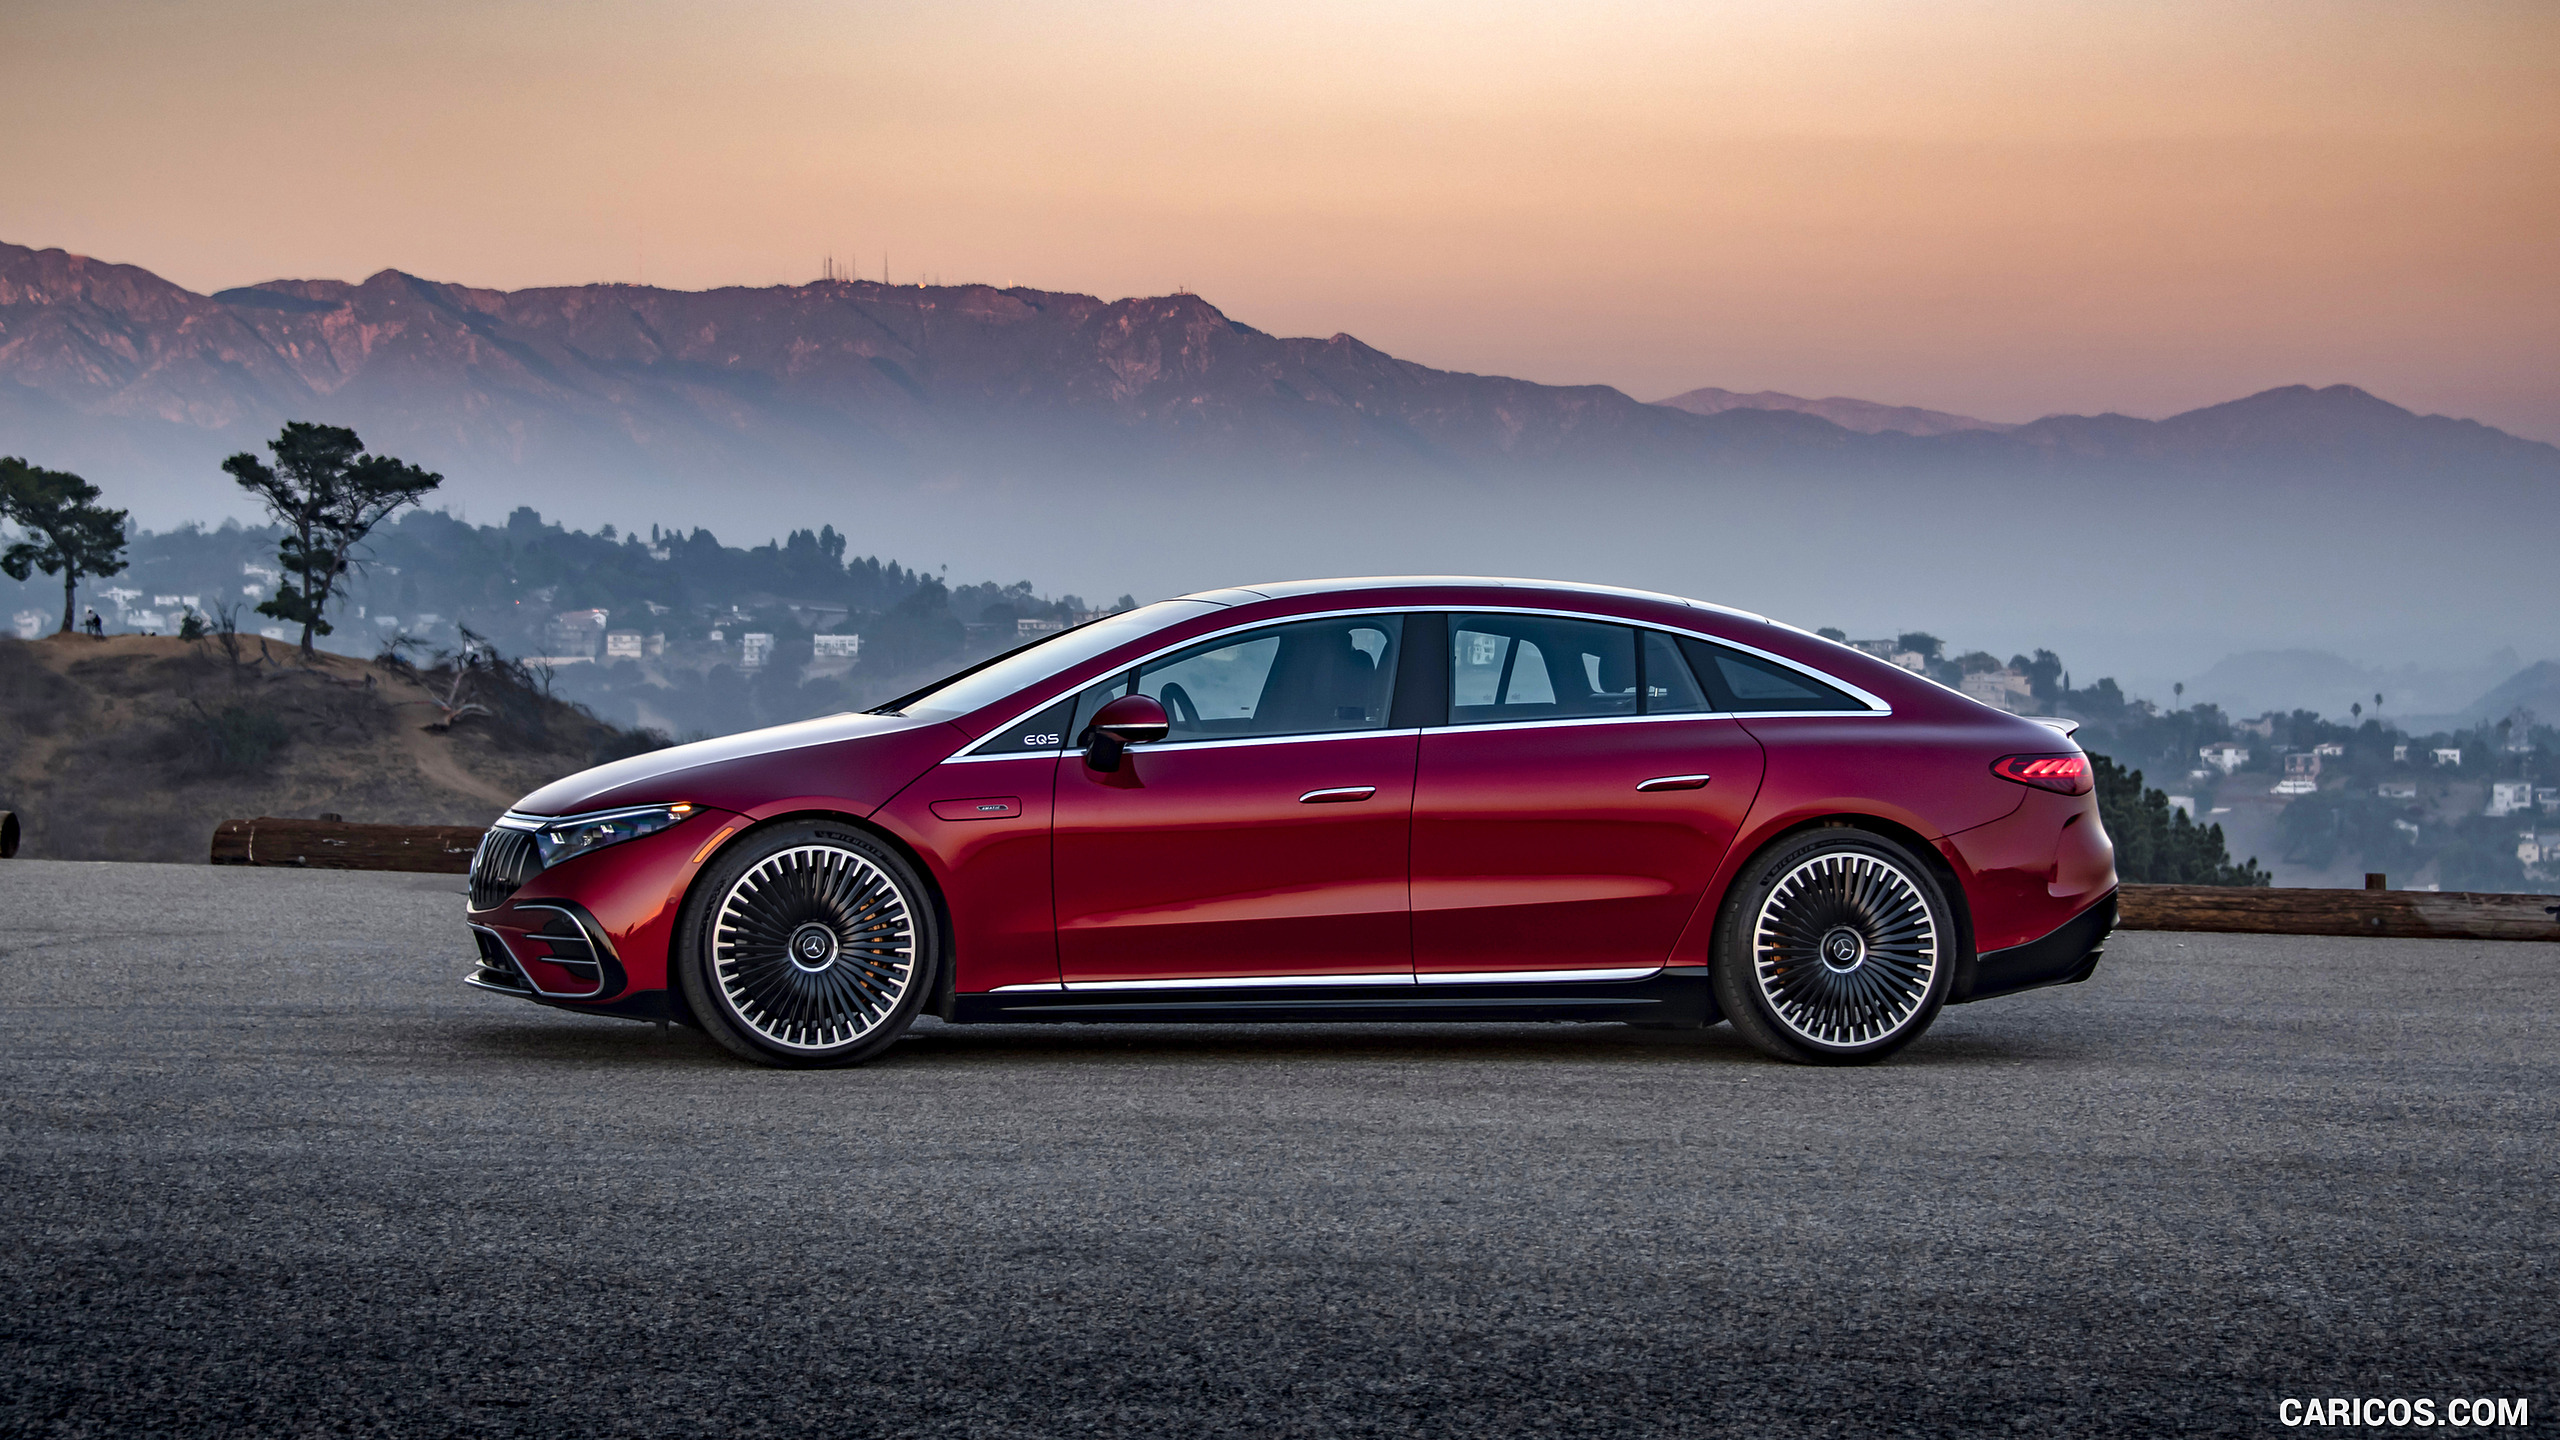 2022 Mercedes-AMG EQS 53 4MATIC+ (Color: Hyazinth Red Metallic) - Side, #63 of 76